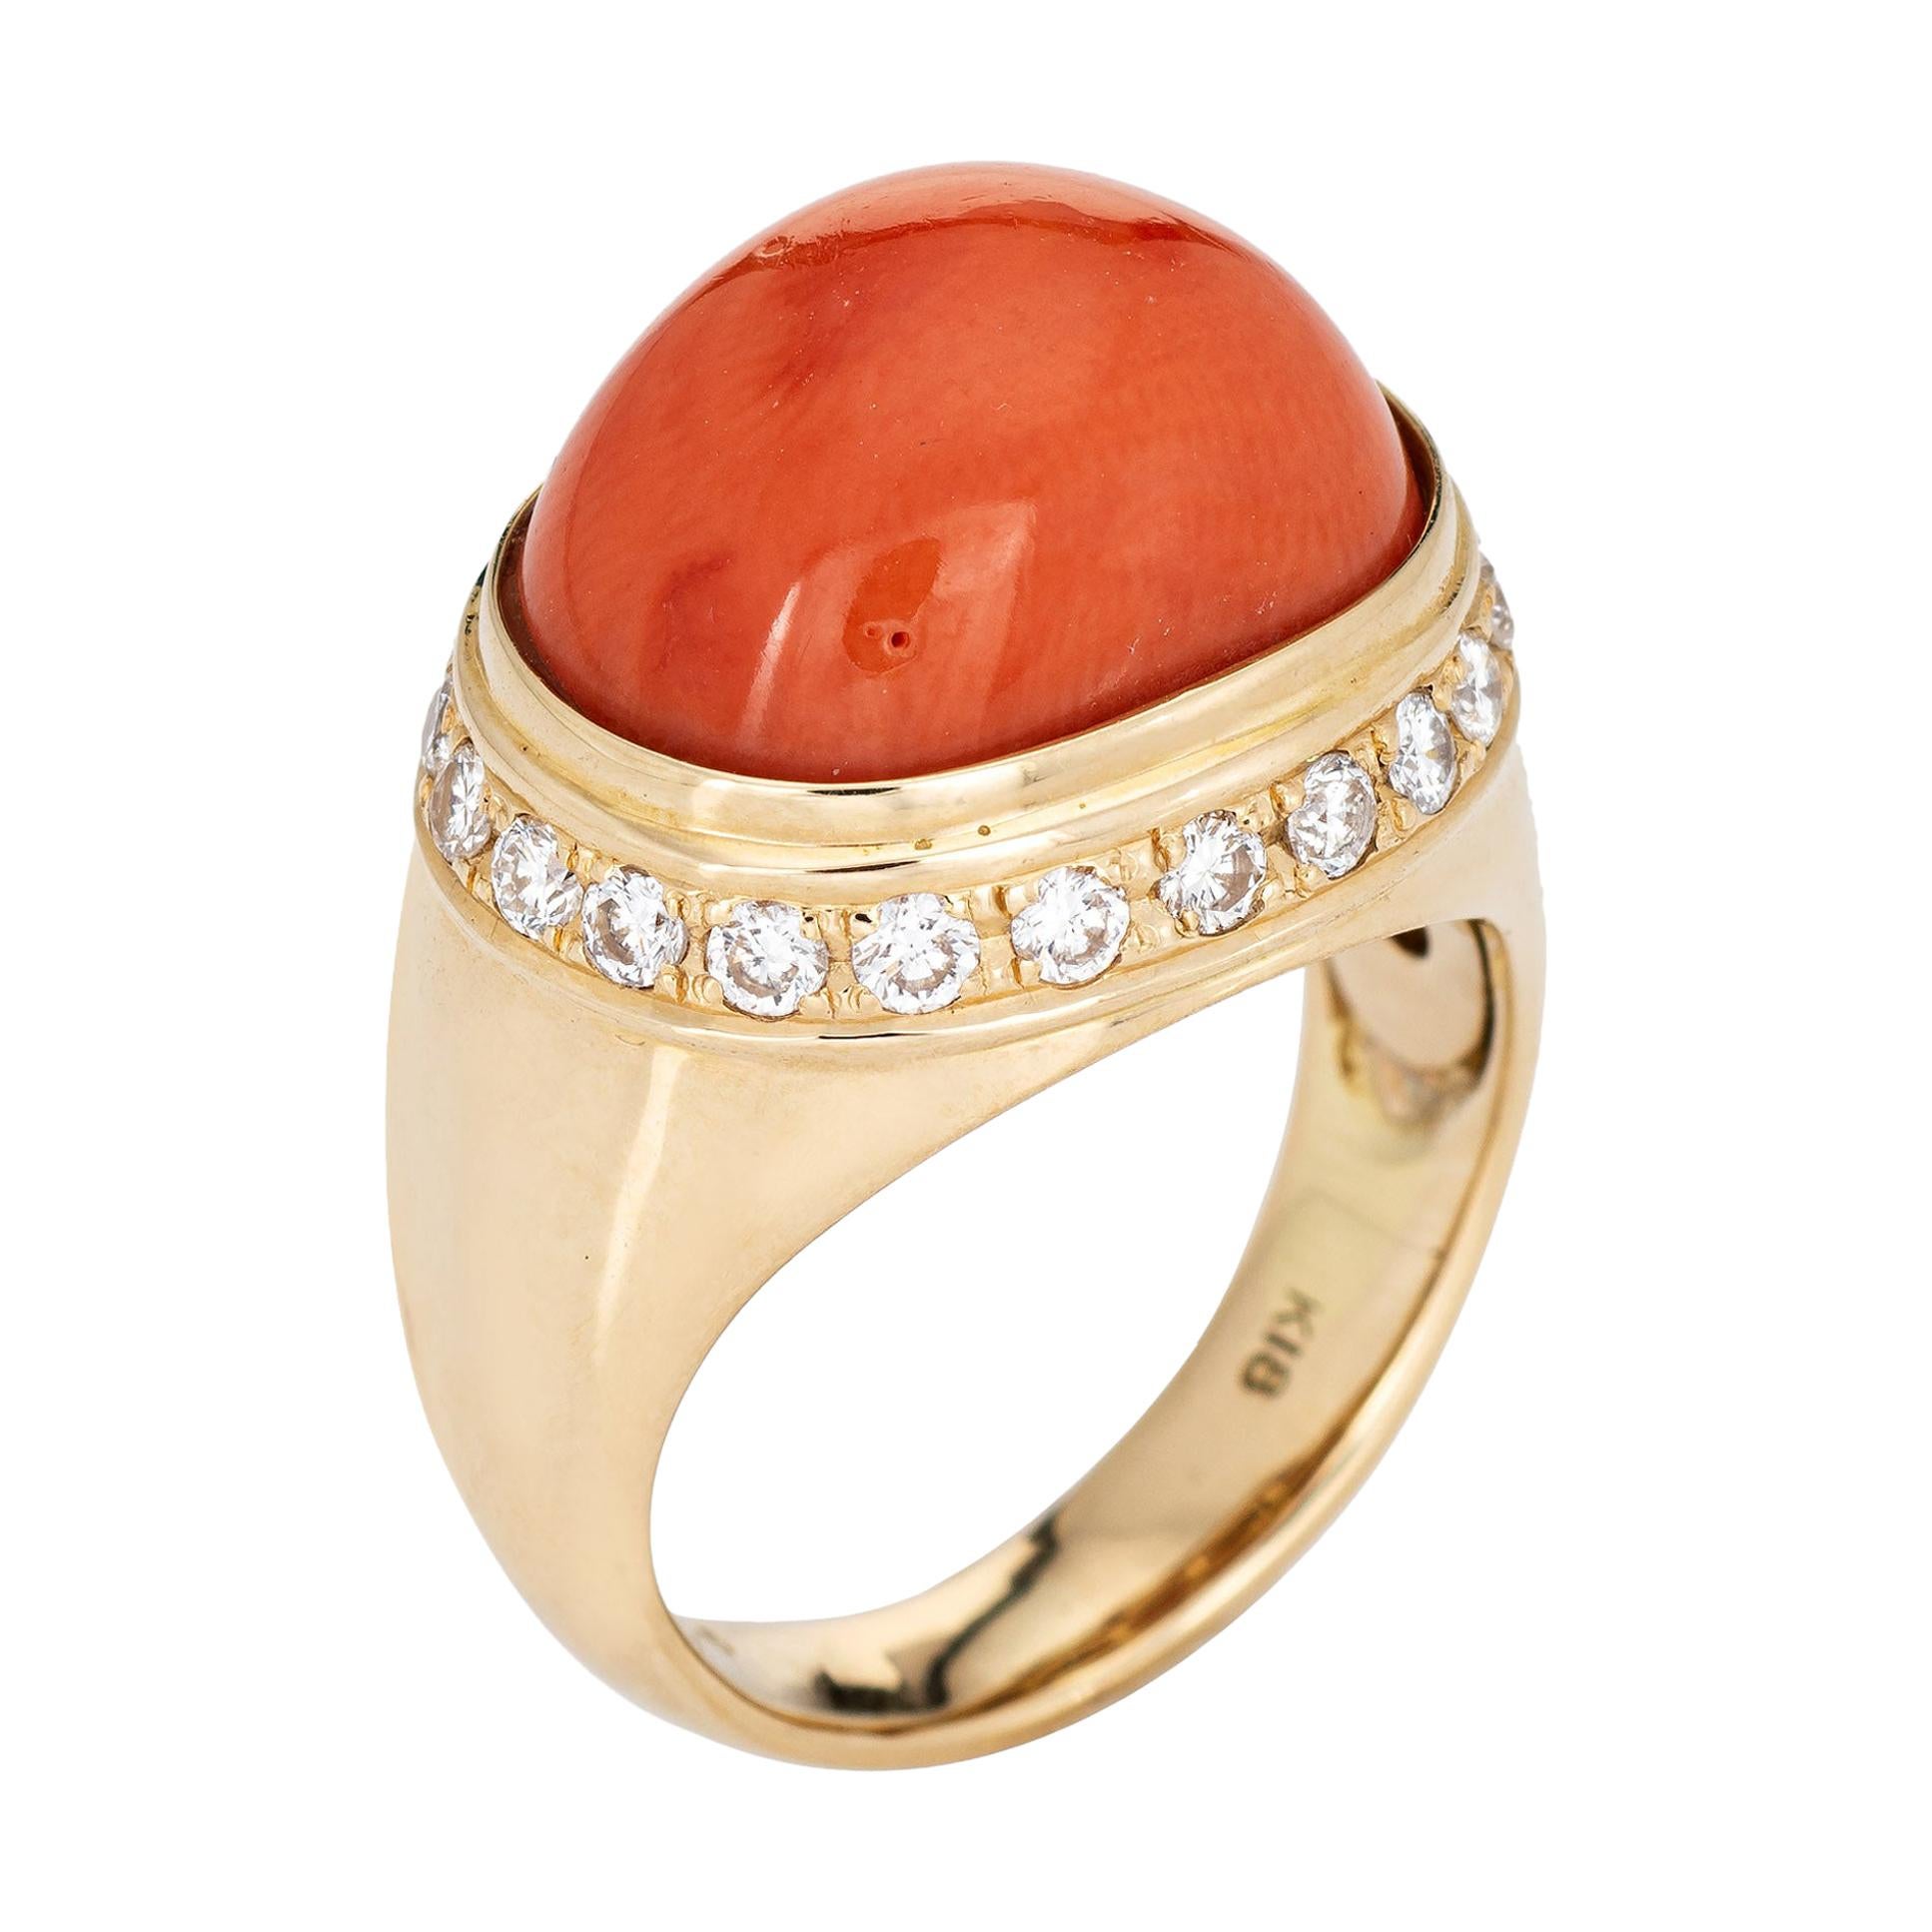 Salmon Coral Diamond Ring Estate 18k Yellow Gold East West Mount Jewelry